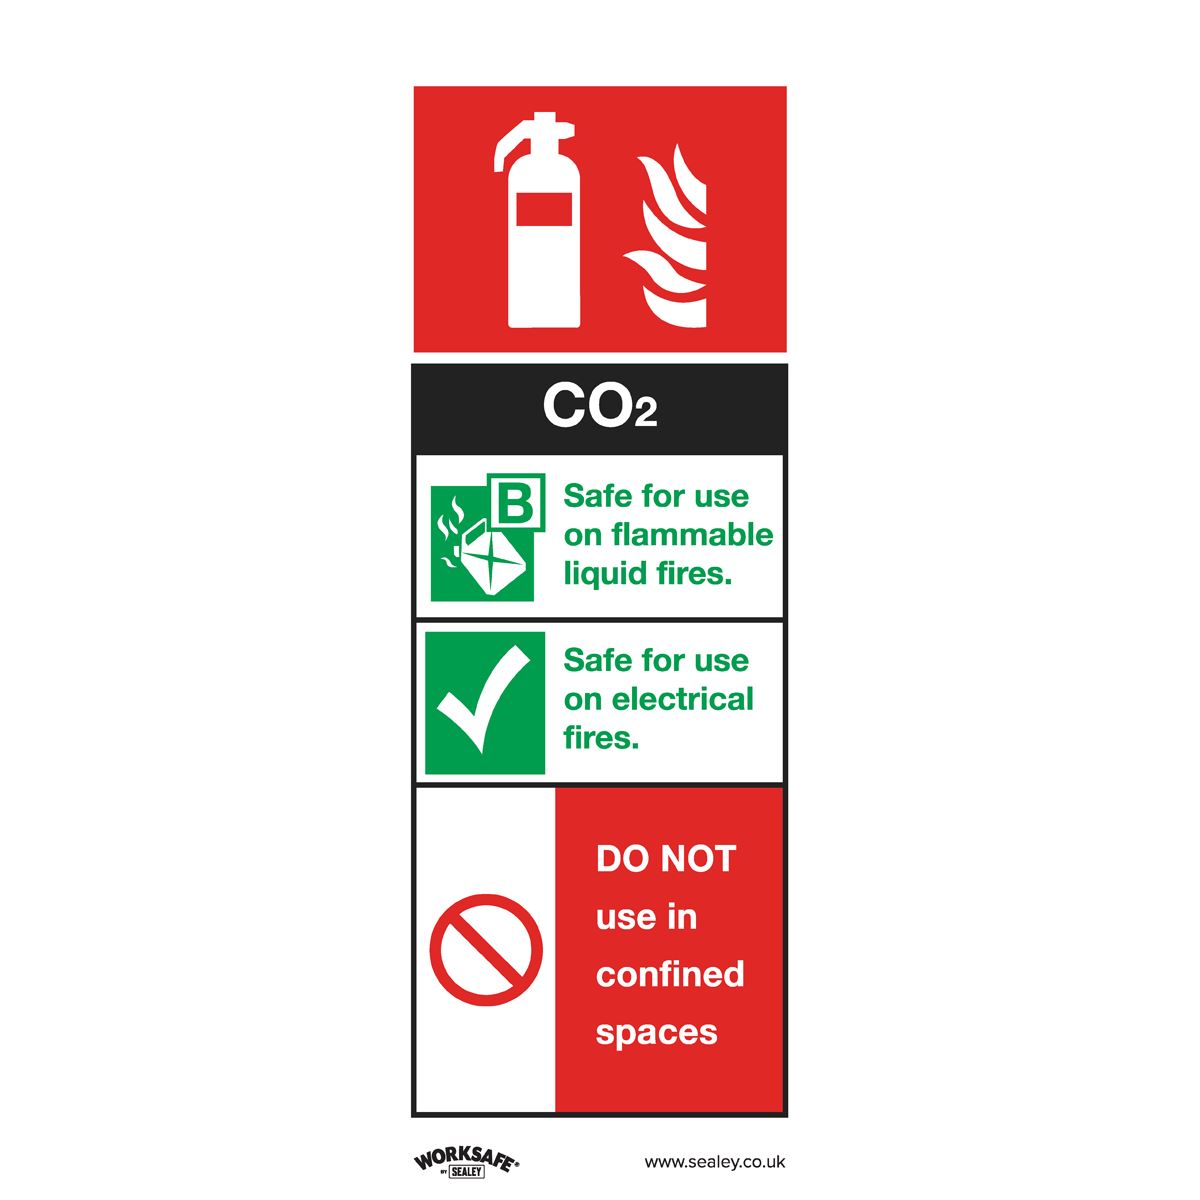 Worksafe by Sealey Safe Conditions Safety Sign - CO2 Fire Extinguisher - Rigid Plastic